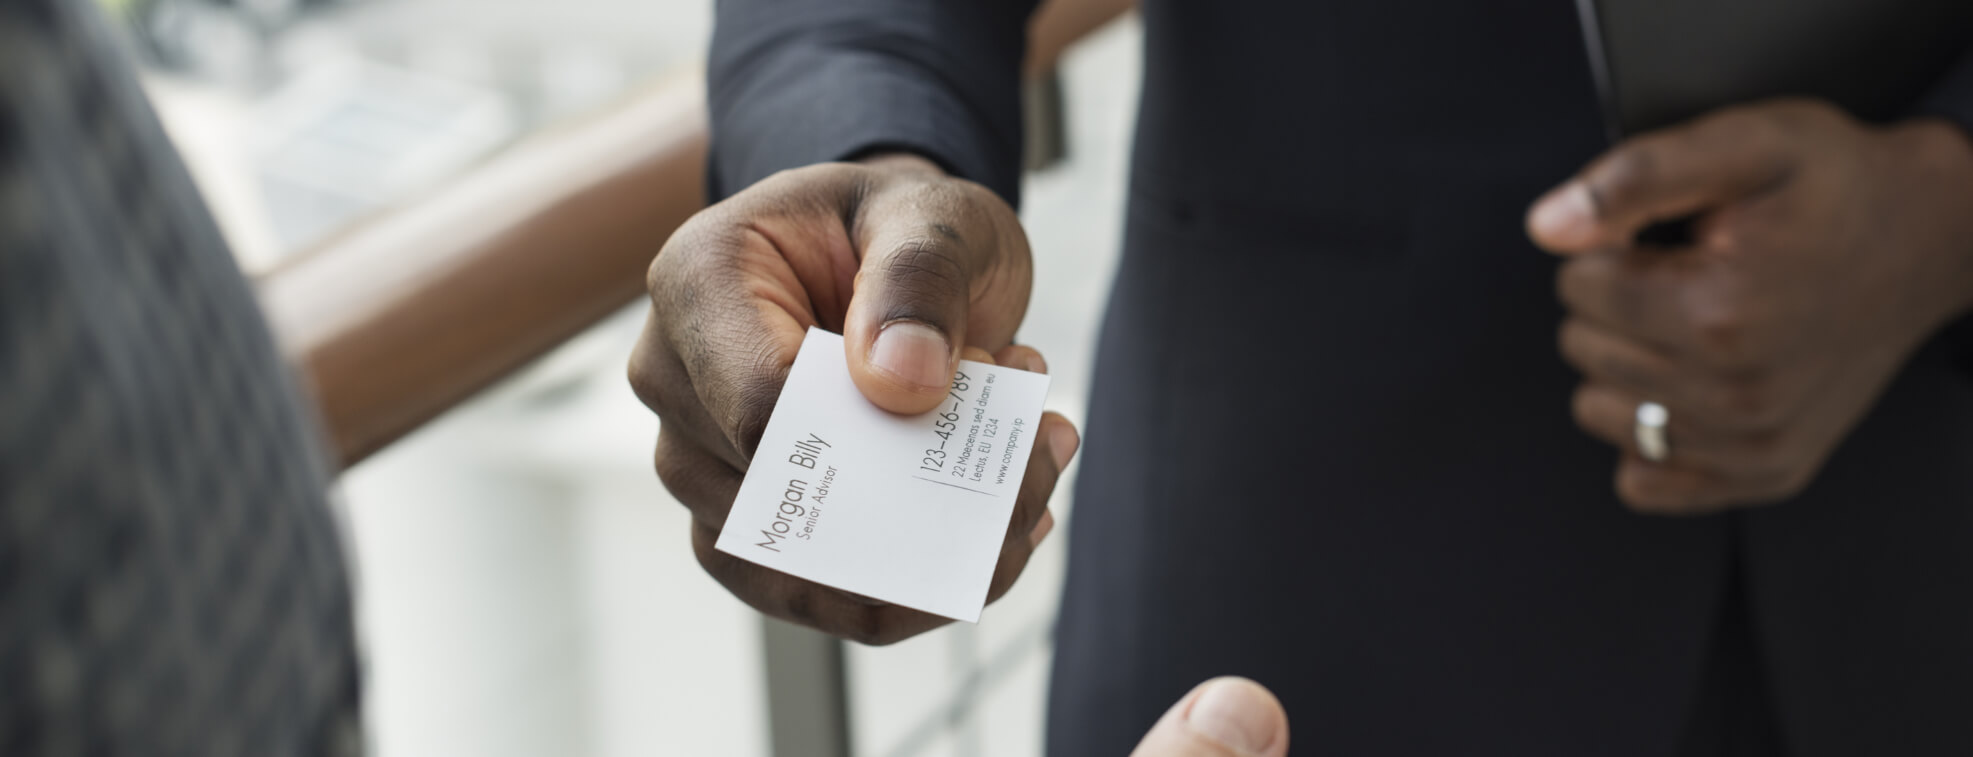 Man handing a high-quality business card to another person